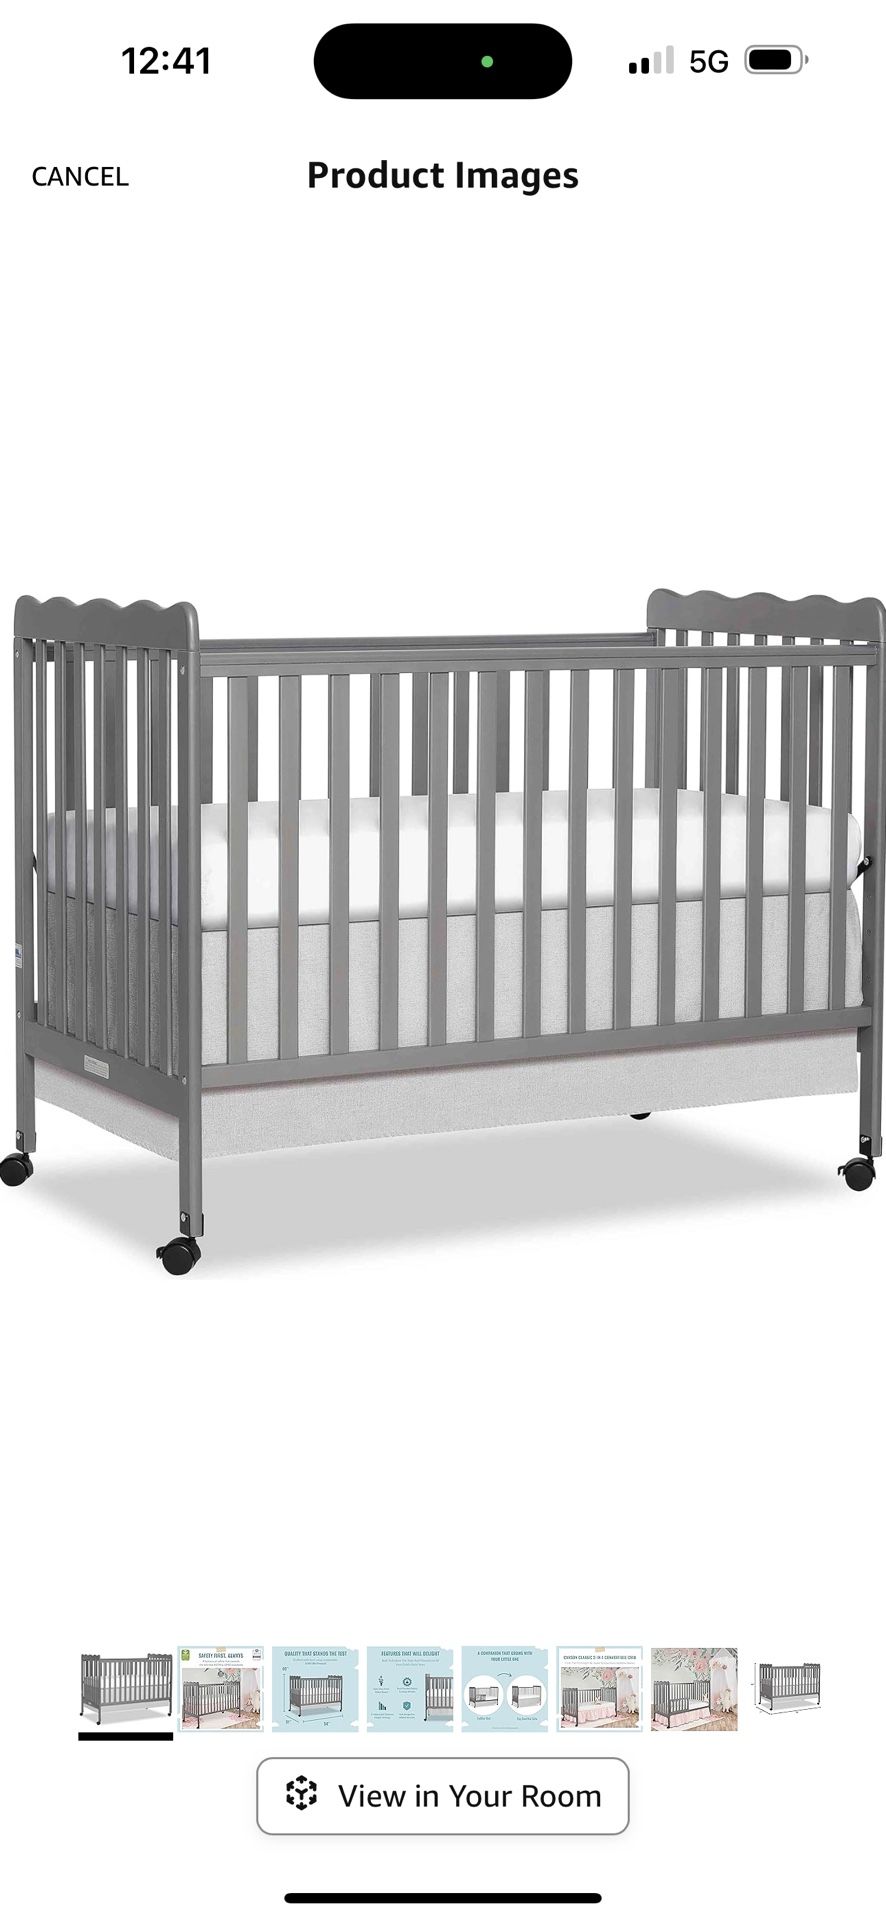 Dream On Me Carson Classic 3-in-1 Convertible Crib in Steel Grey